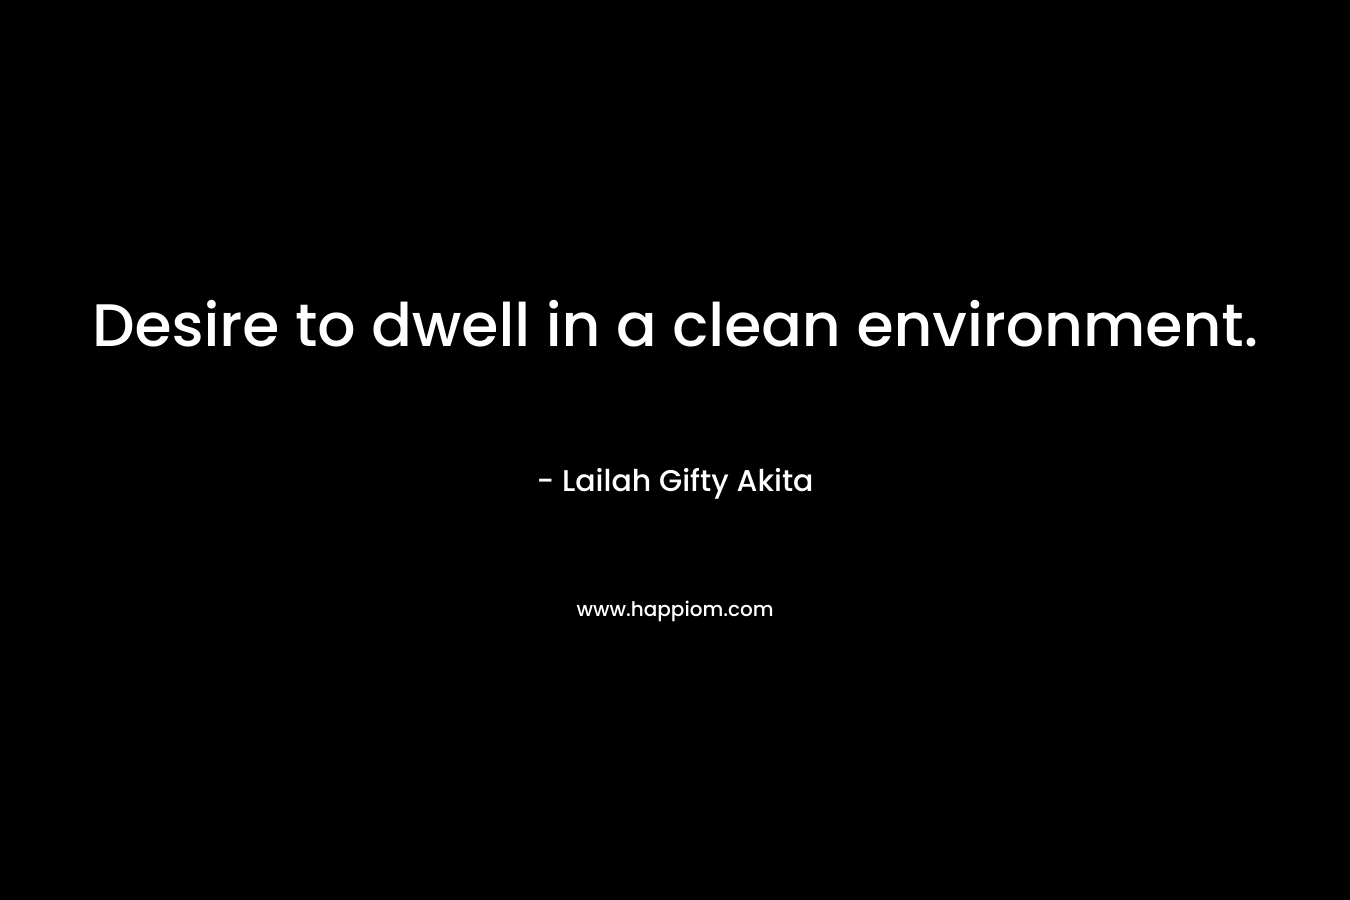 Desire to dwell in a clean environment.